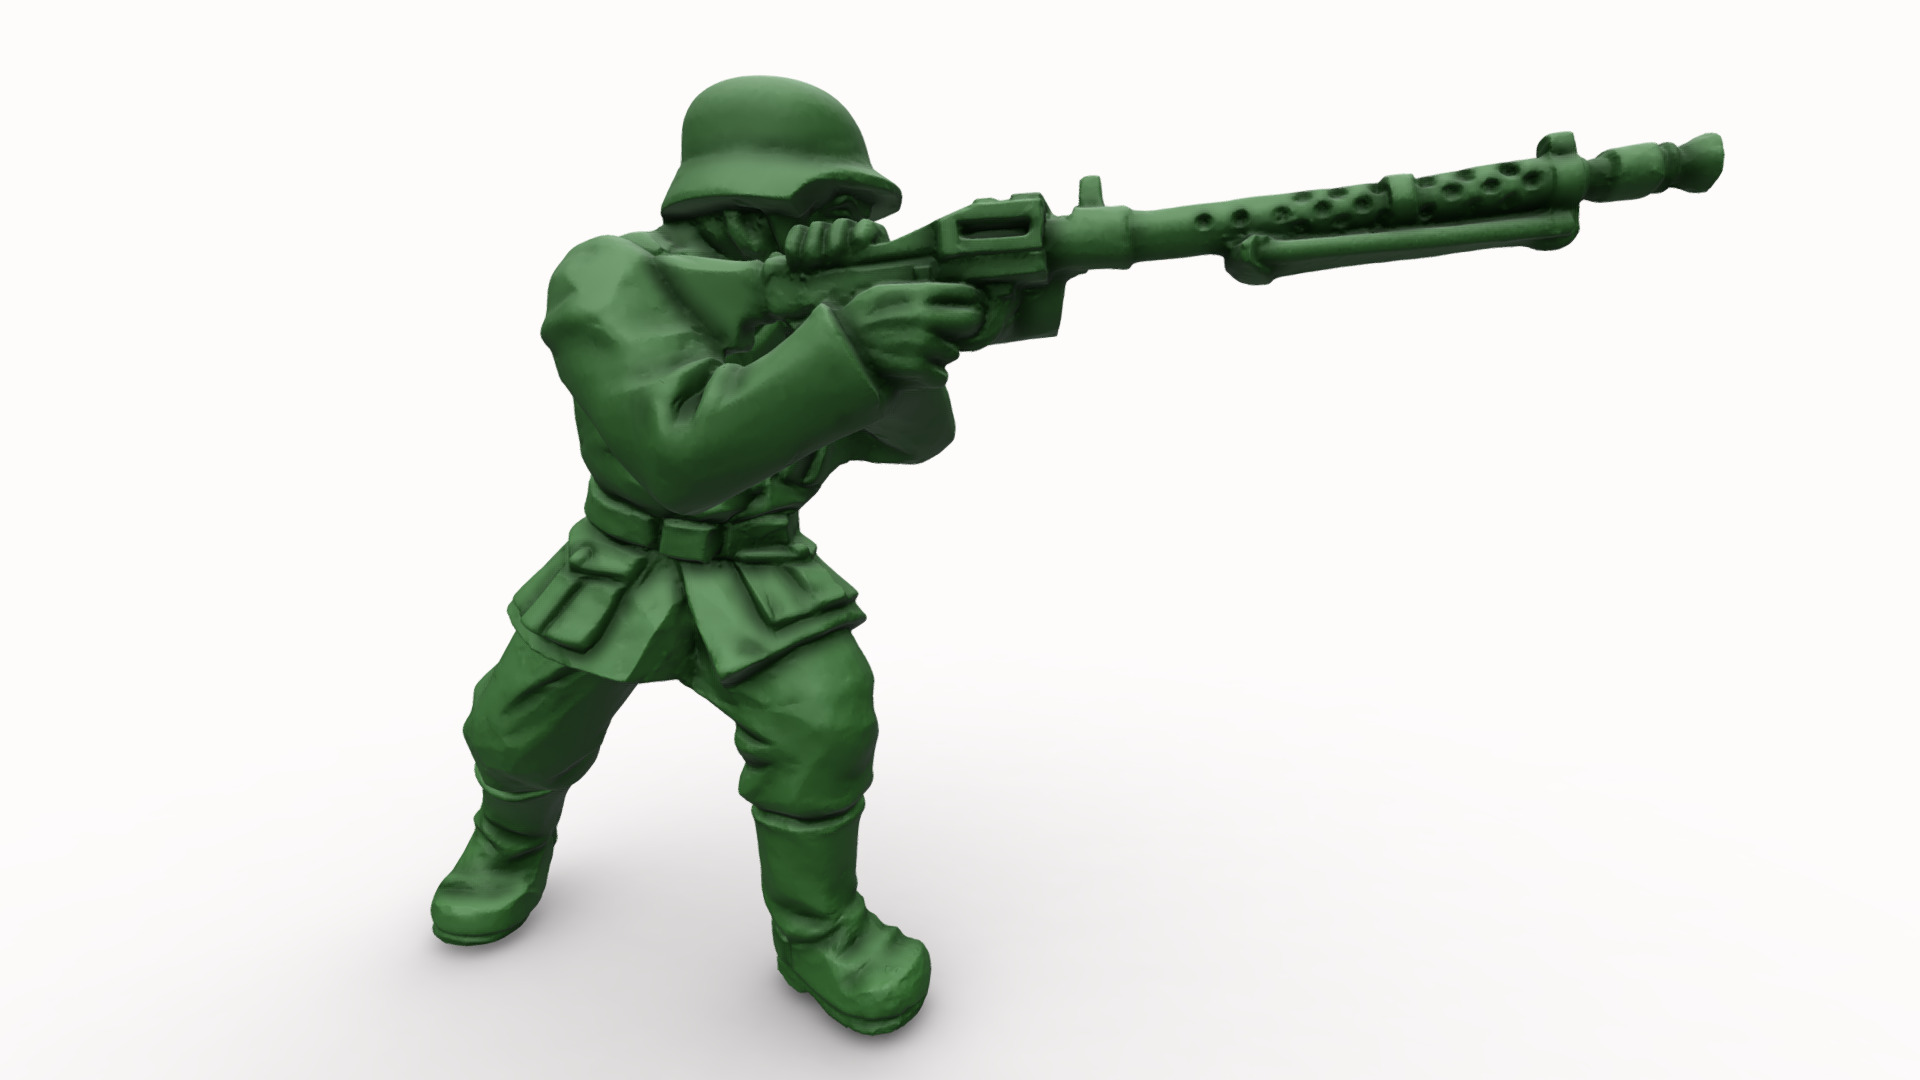 3D model Toy Soldier - This is a 3D model of the Toy Soldier. The 3D model is about a person in a garment holding a gun.